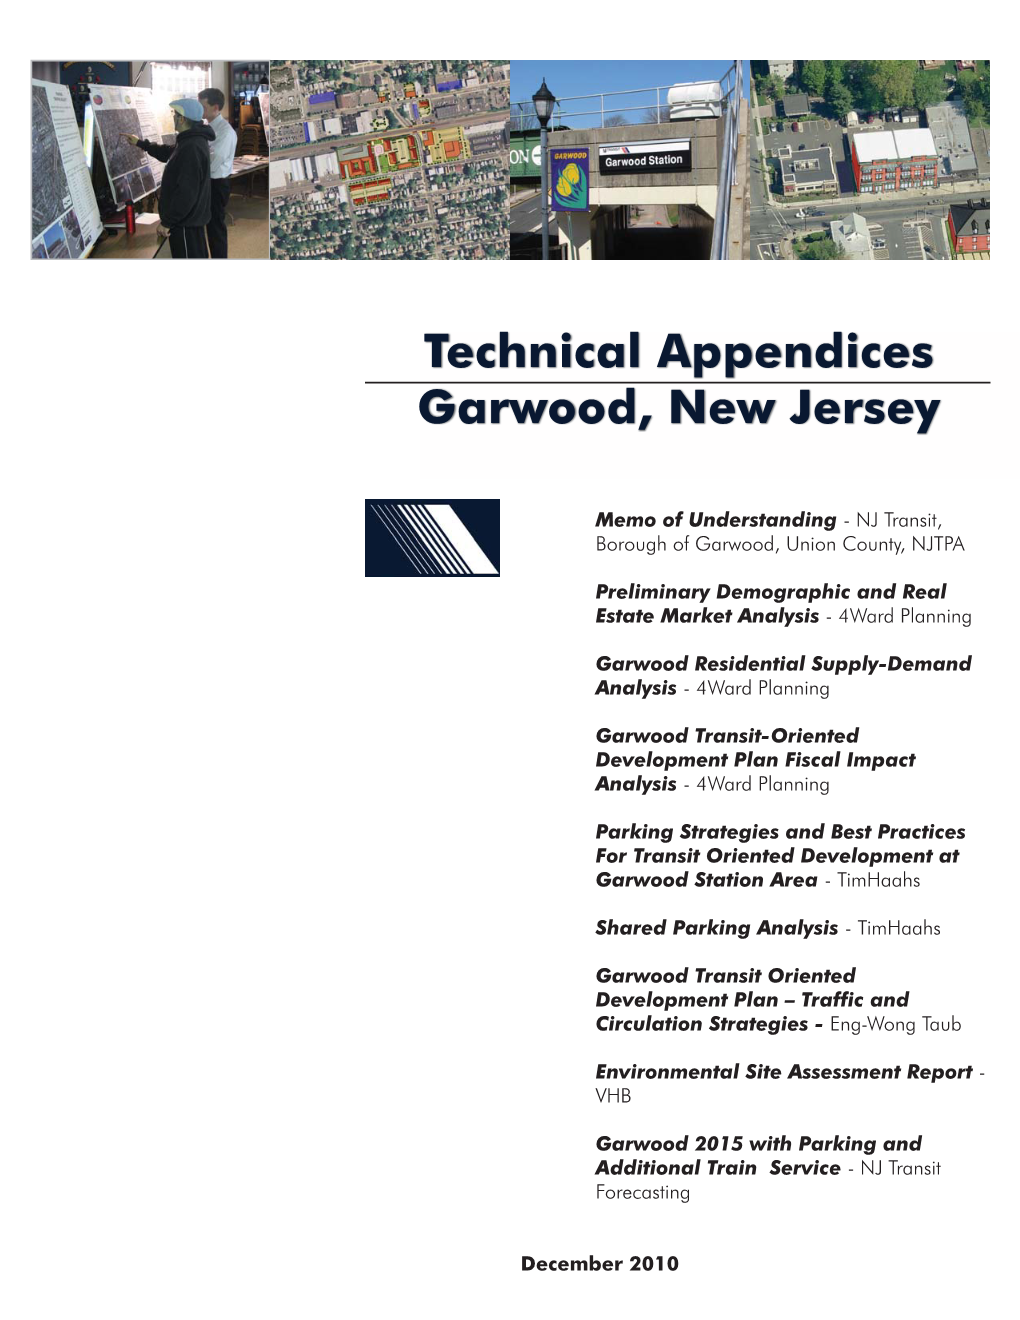 Technical Appendices Garwood, New Jersey